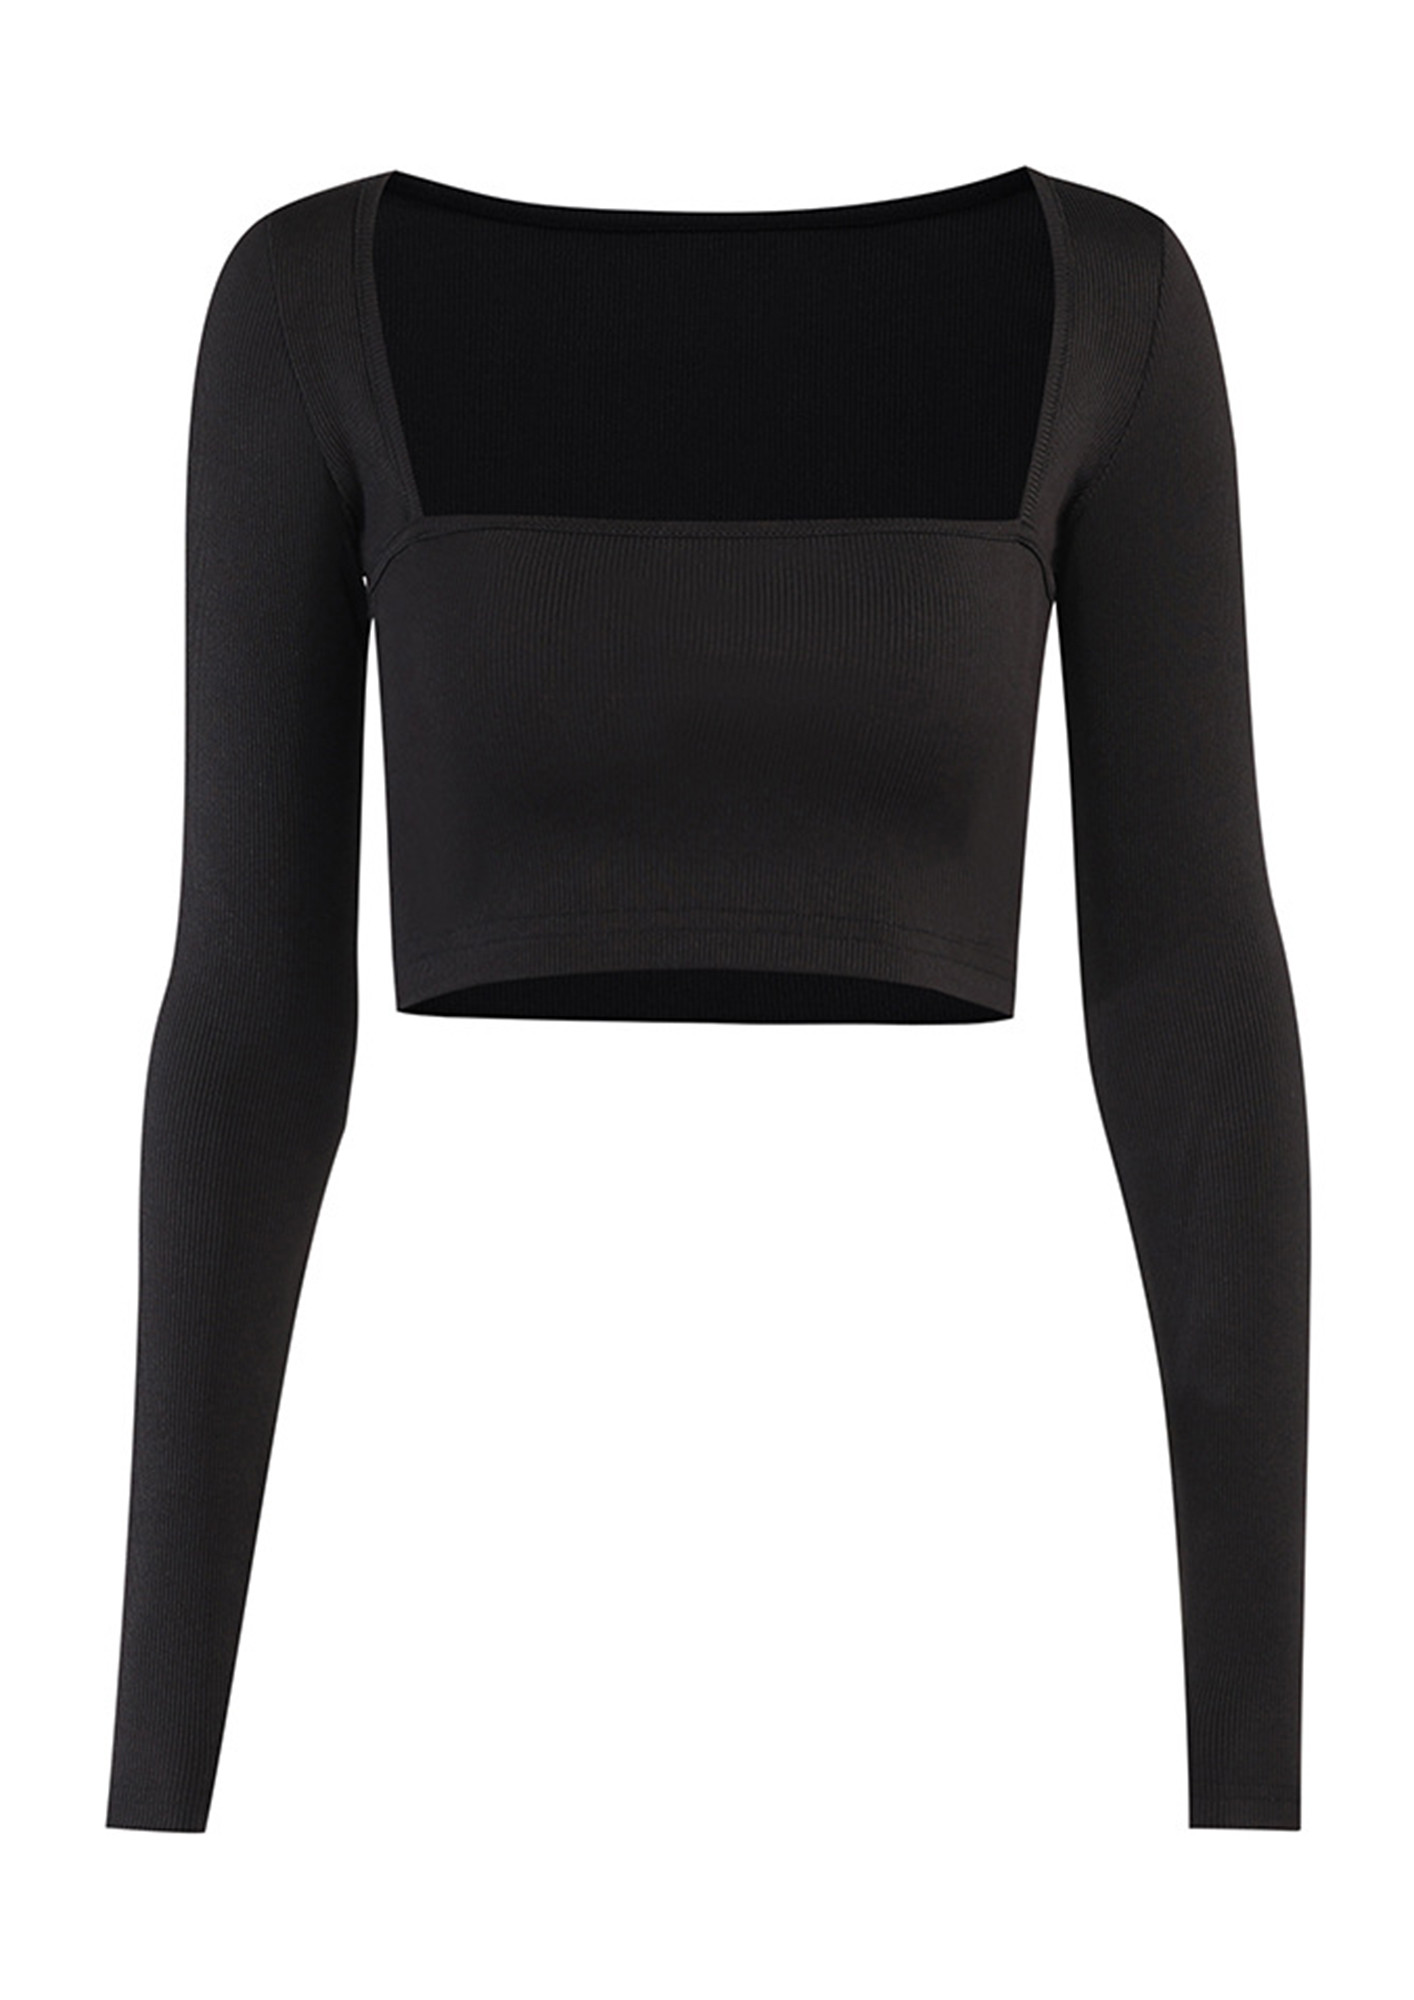 Square Neck Long Sleeve Tops for Women